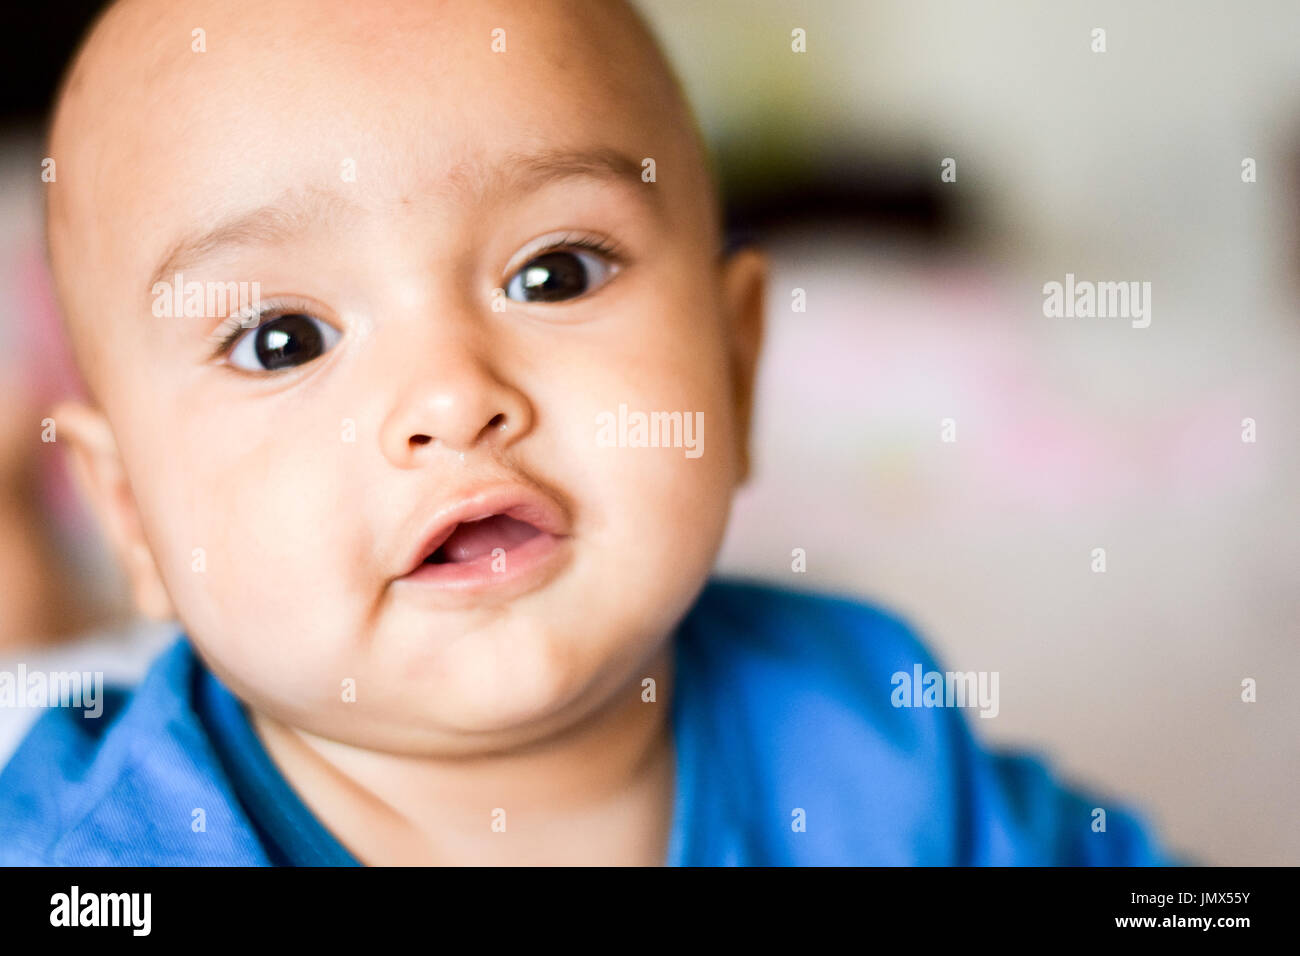 7 months old baby looking into camera Stock Photo